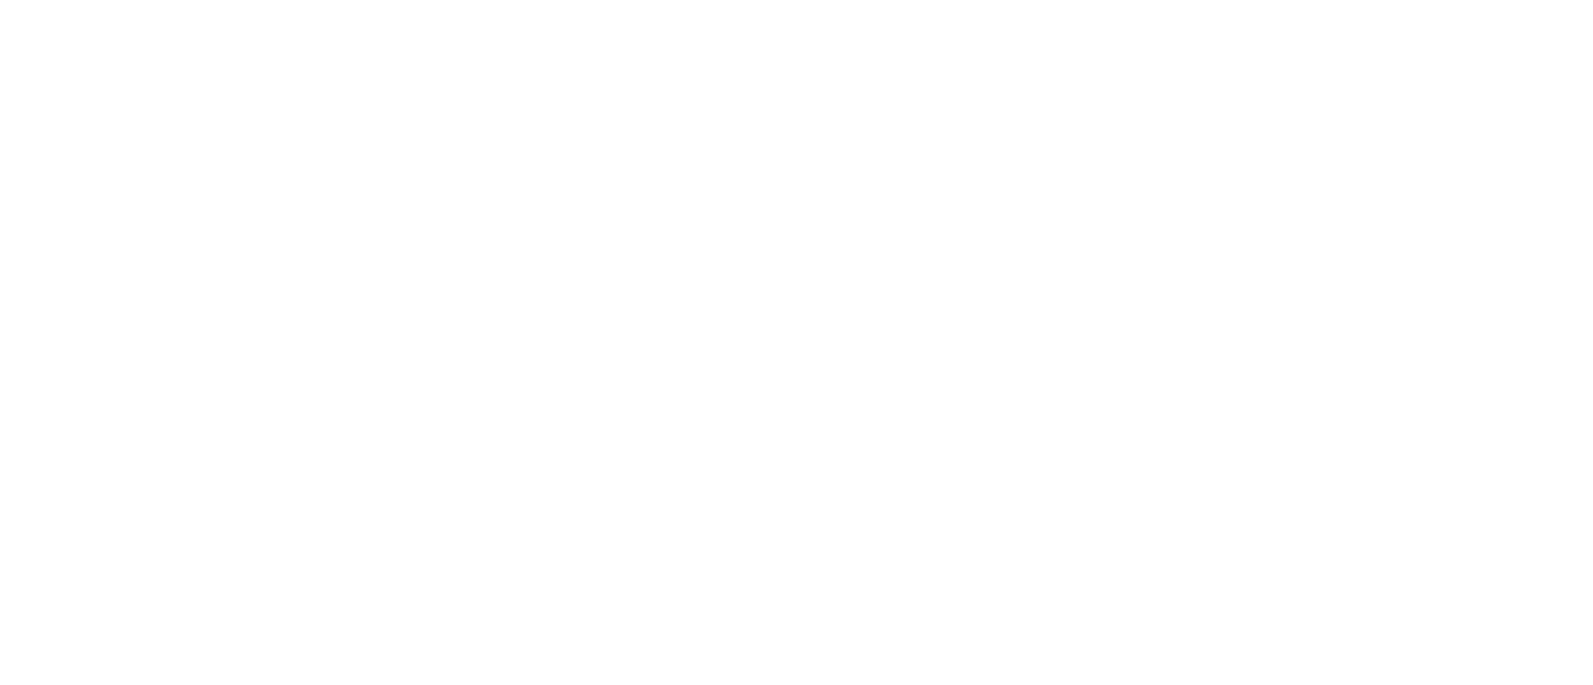 Intermediate Capital Group (ICG) logo for dark backgrounds (transparent PNG)